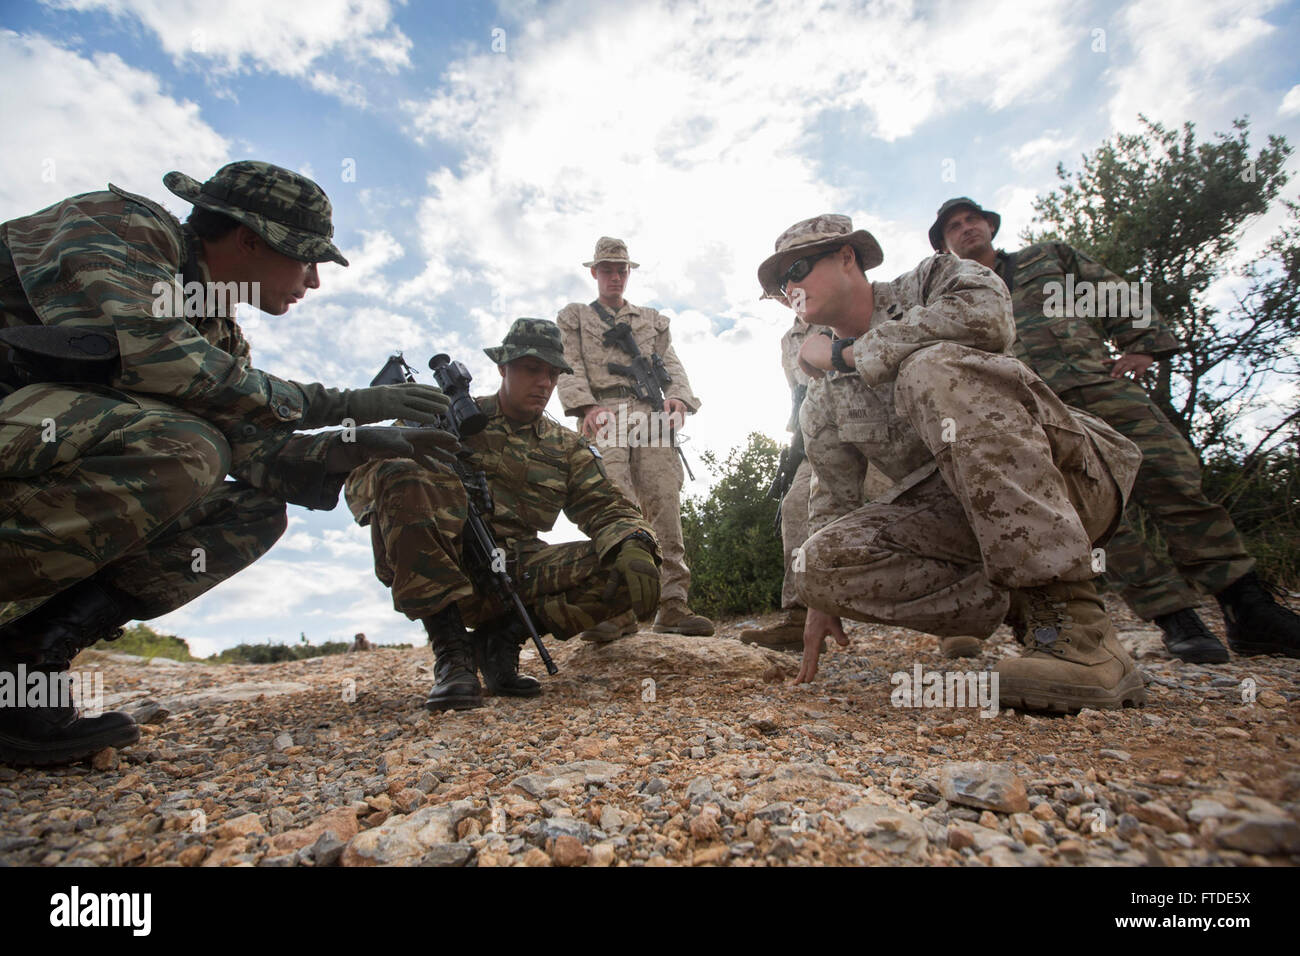 150626-M-YH418-004: VOLOS, Greece (June 26, 2015) - Sergeant James Knox, an explosive ordnance disposal technician with the 24th Marine Expeditionary Unit (MEU), gives a class on identifying IEDs to Greek Marines with the 521st Marine Battalion at a training site near Volos, Greece, June 26, 2015,as part of a bilateral training exercise . The 24th MEU is embarked on the ships of the Iwo Jima Amphibious Ready Group and is conducting naval operations in the U.S. 6th Fleet area of operations in support of U.S. national security interests in Europe. (U.S. Marine Corps photo by Cpl. Todd F. Michale Stock Photo